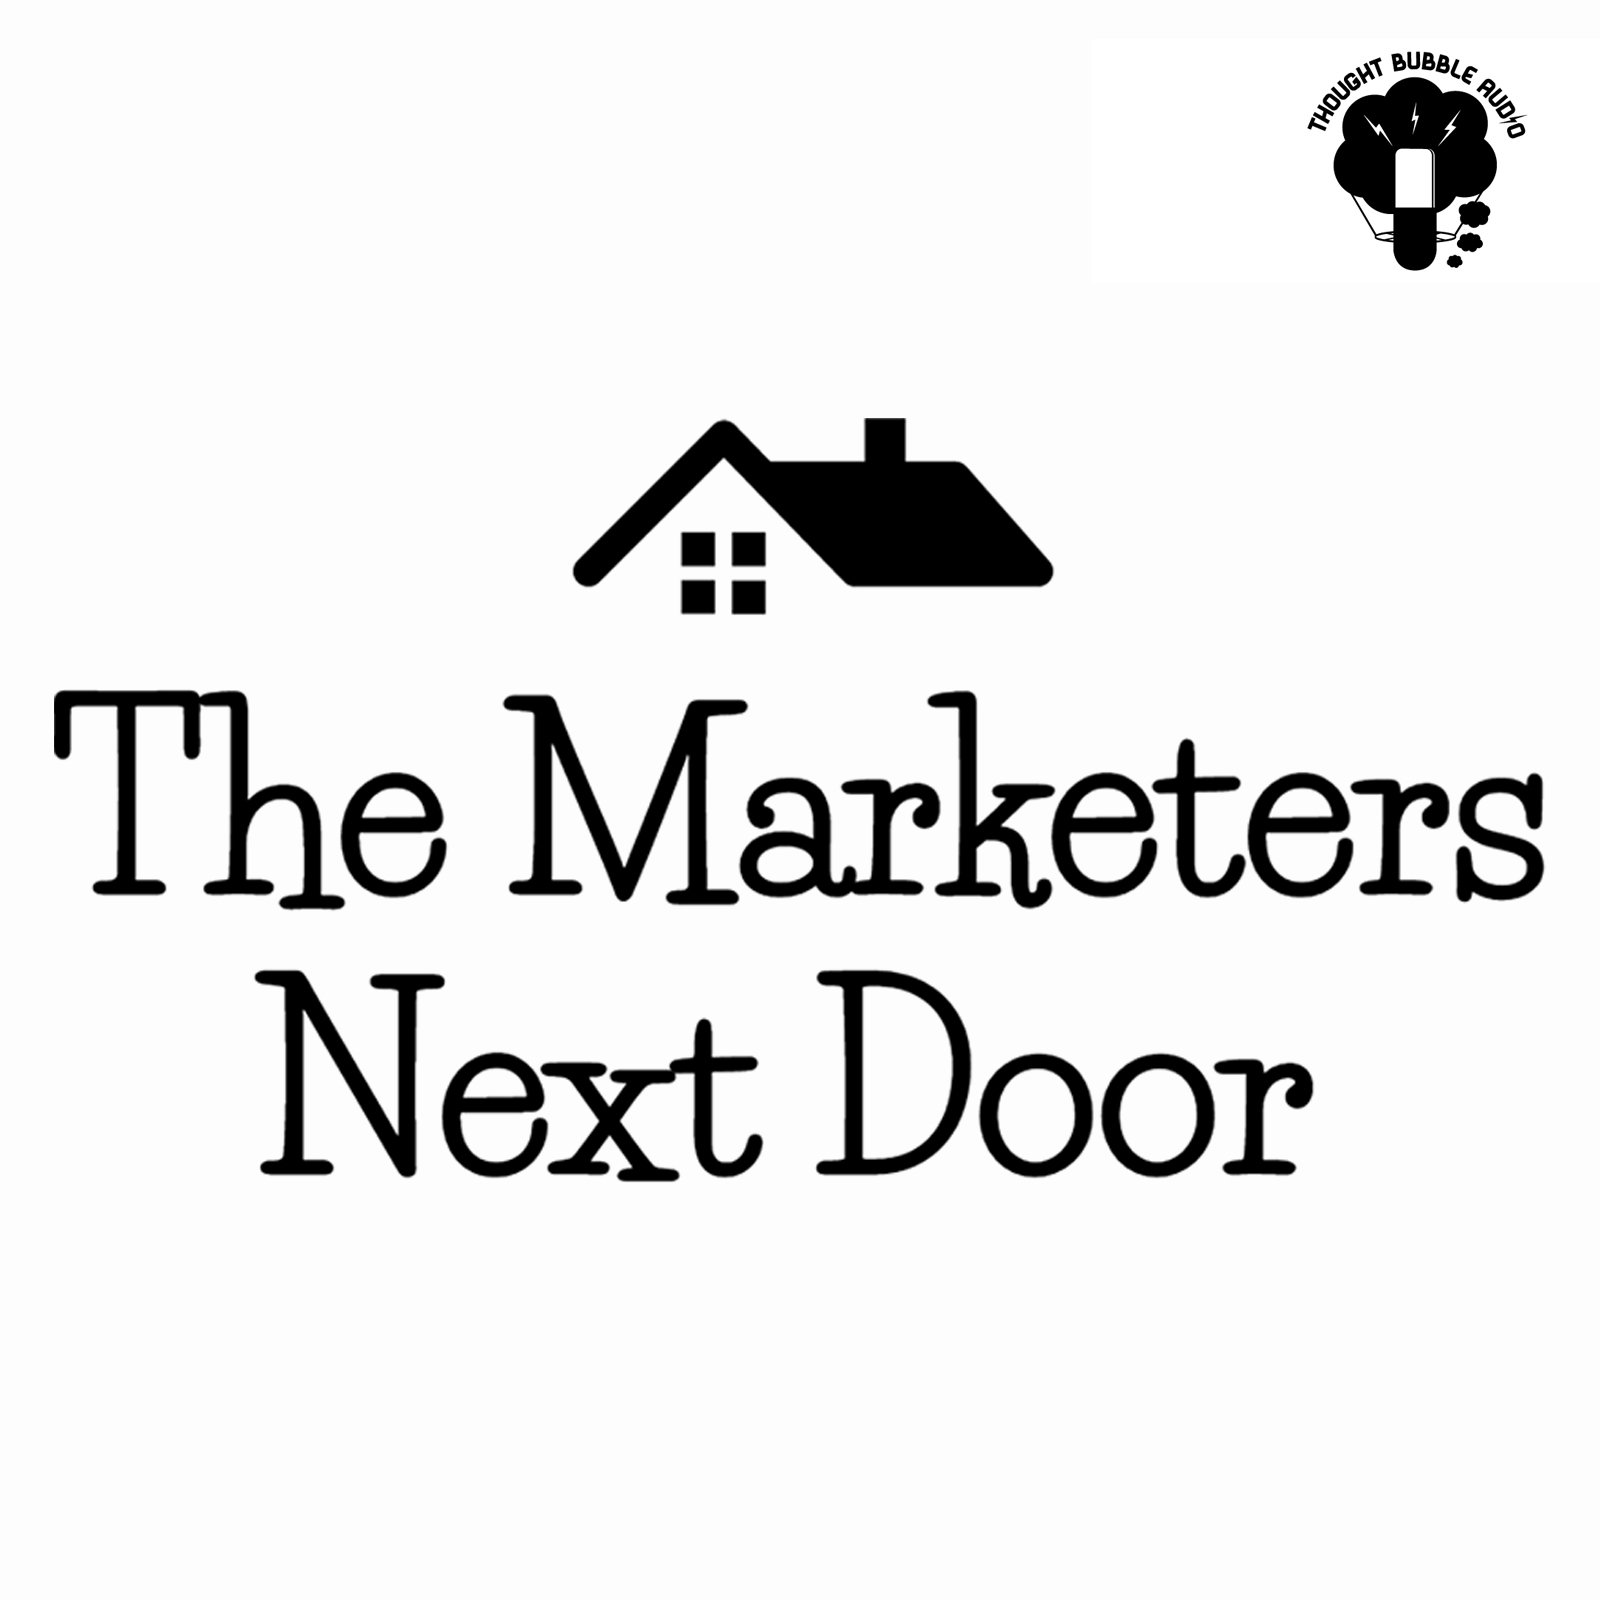 The Marketers Next Door cover art - a black line art drawing of a simple house against a simple white backdrop